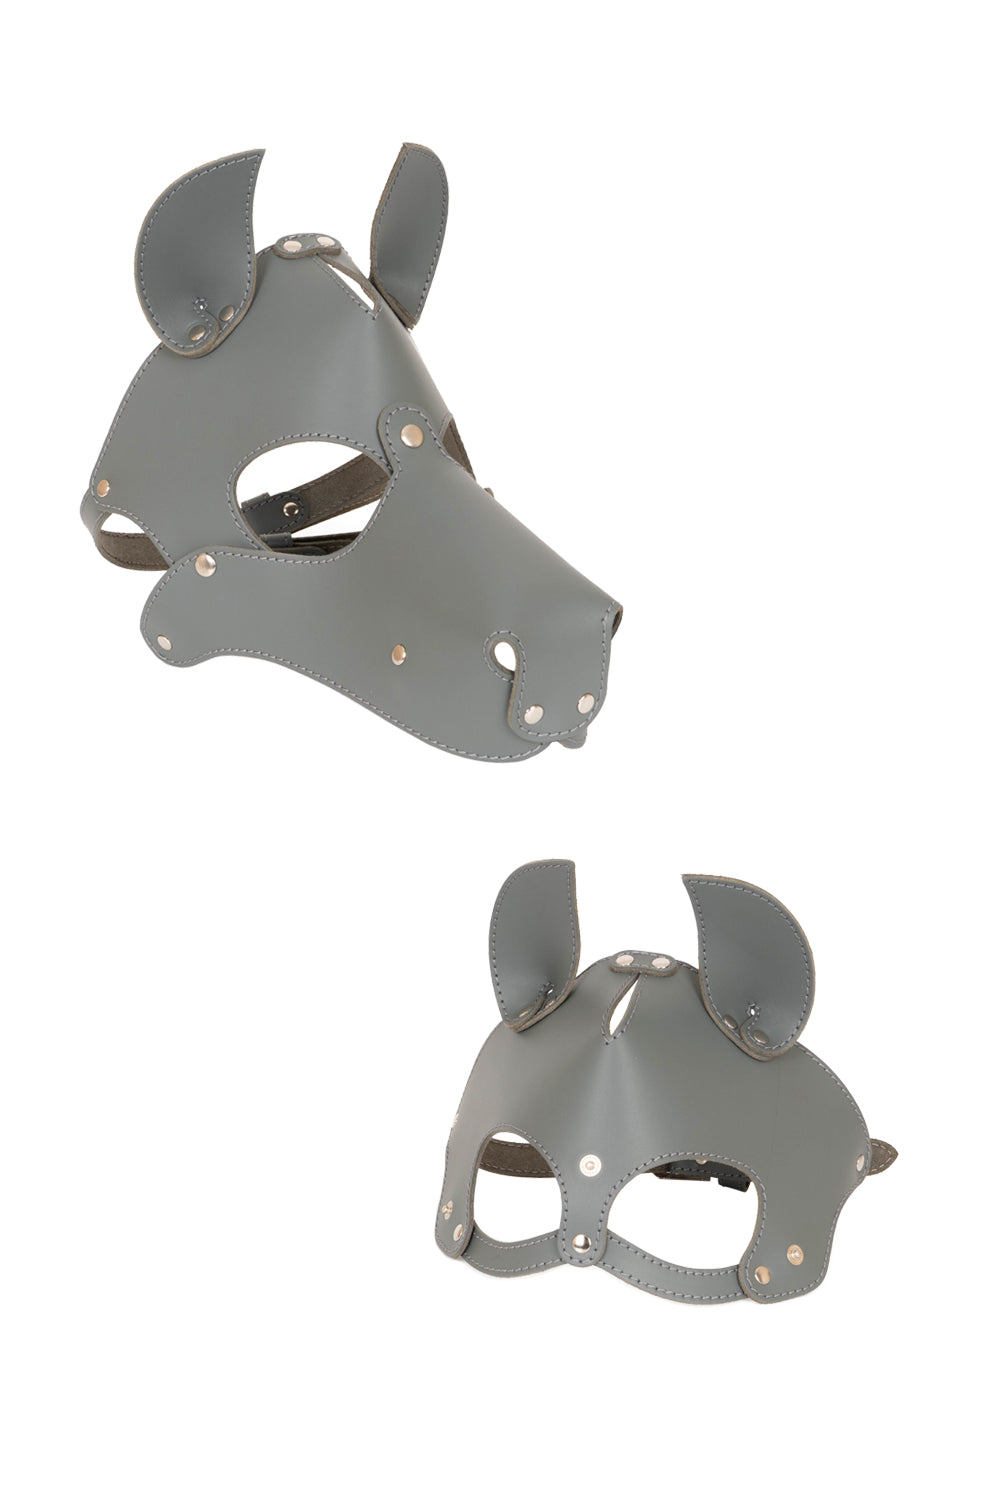 Dog mask with detachable muzzle. Red